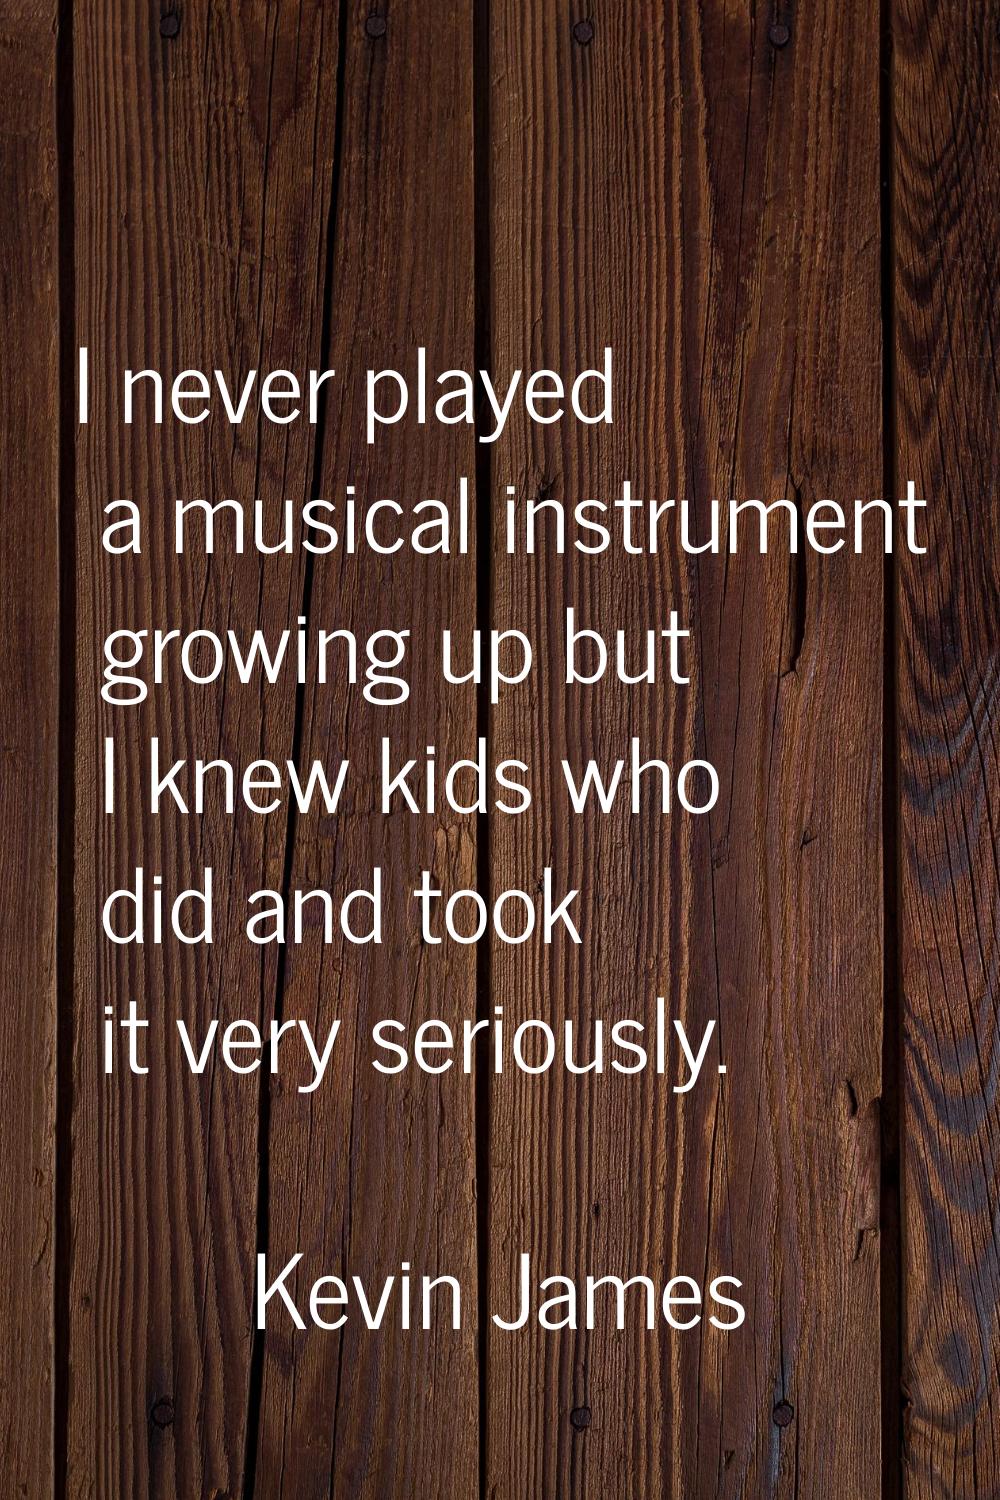 I never played a musical instrument growing up but I knew kids who did and took it very seriously.